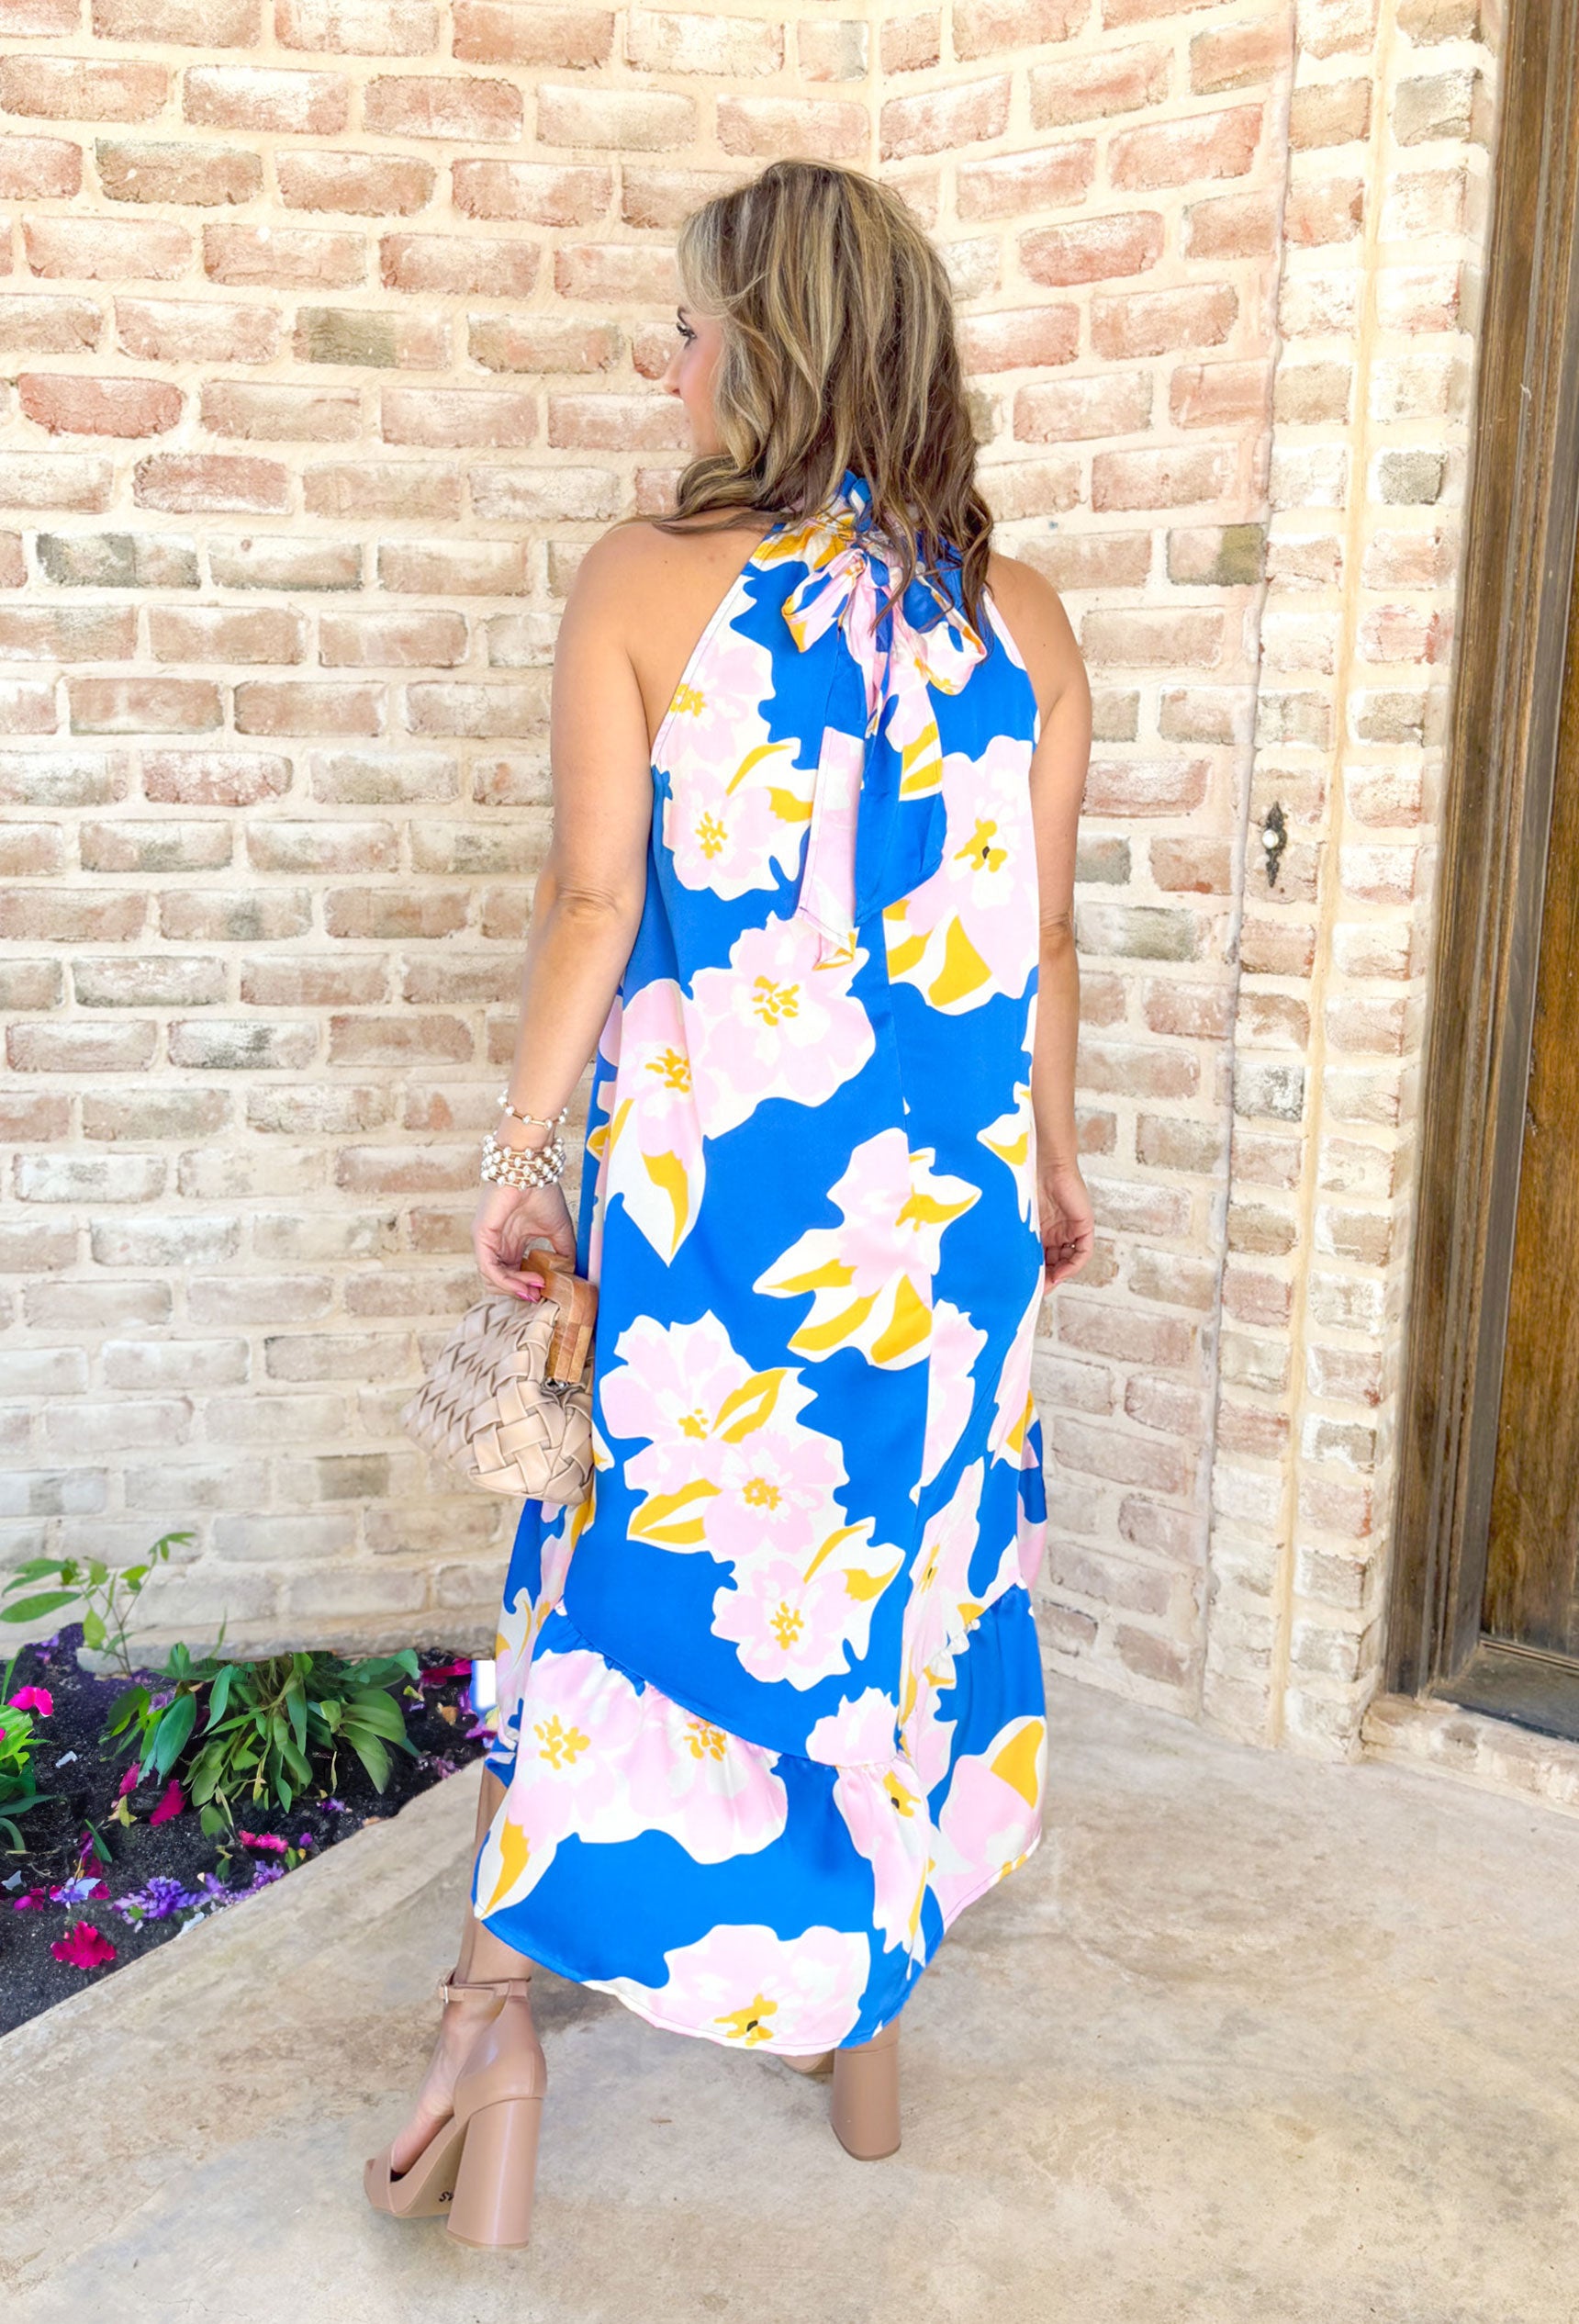 When You're Mine Dress, cobalt sleeveless high neck dress with ruffling on the neck. Floral pattern across the dress in light pink, white, and yellow with tier detail on the bottom of the dress